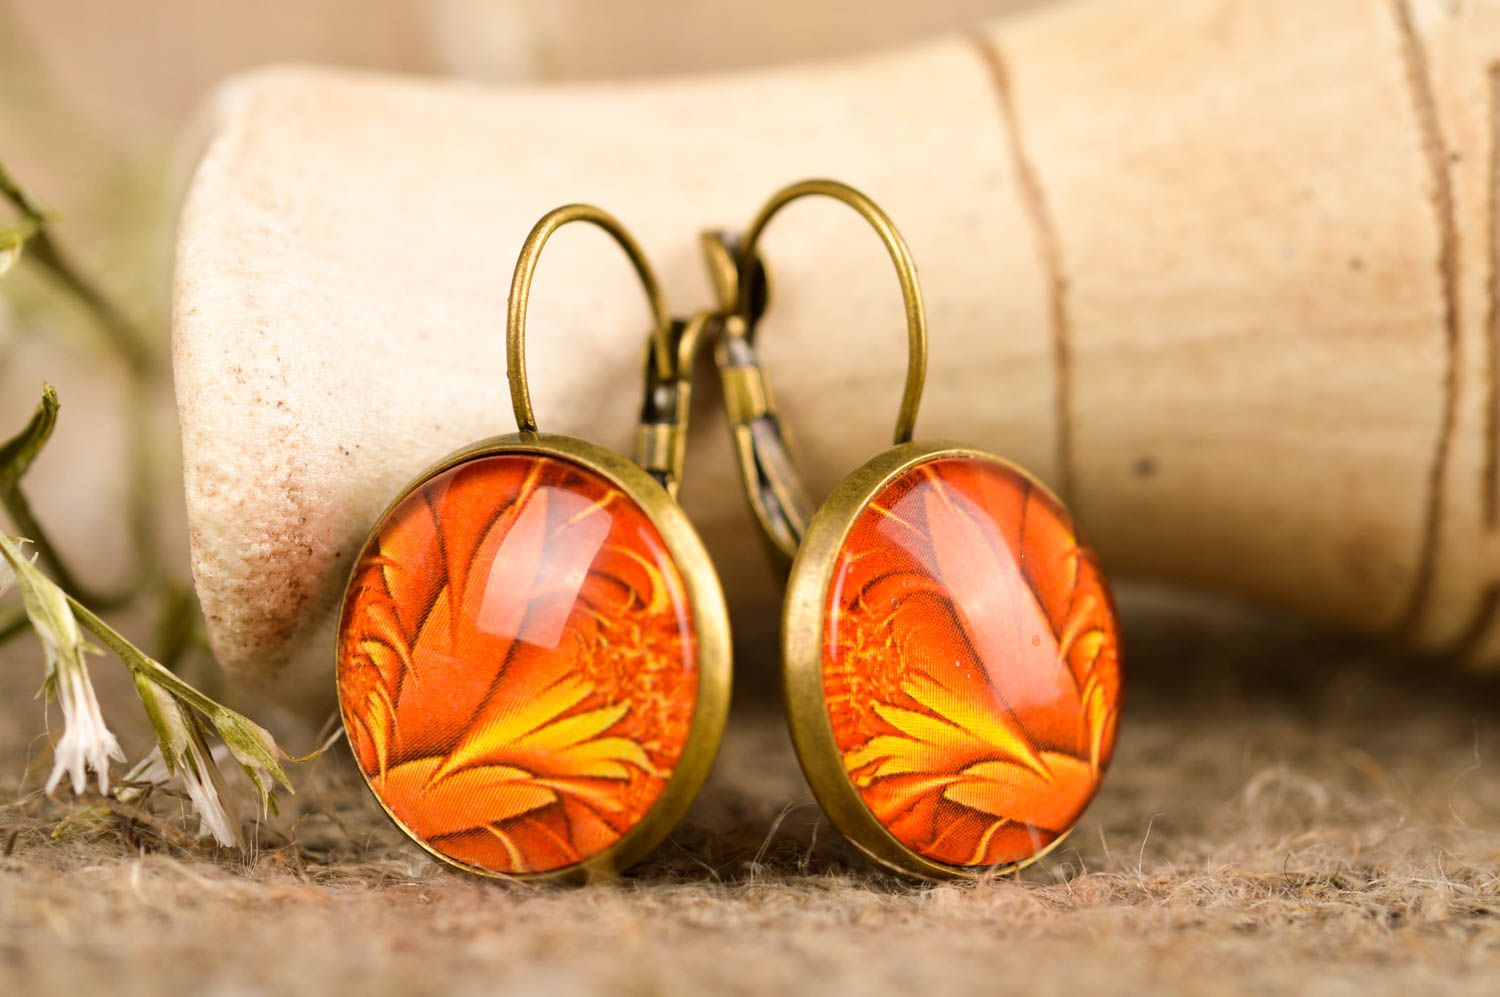 Stylish earrings with print handmade jewelry cabochon earrings vintage jewelry photo 1